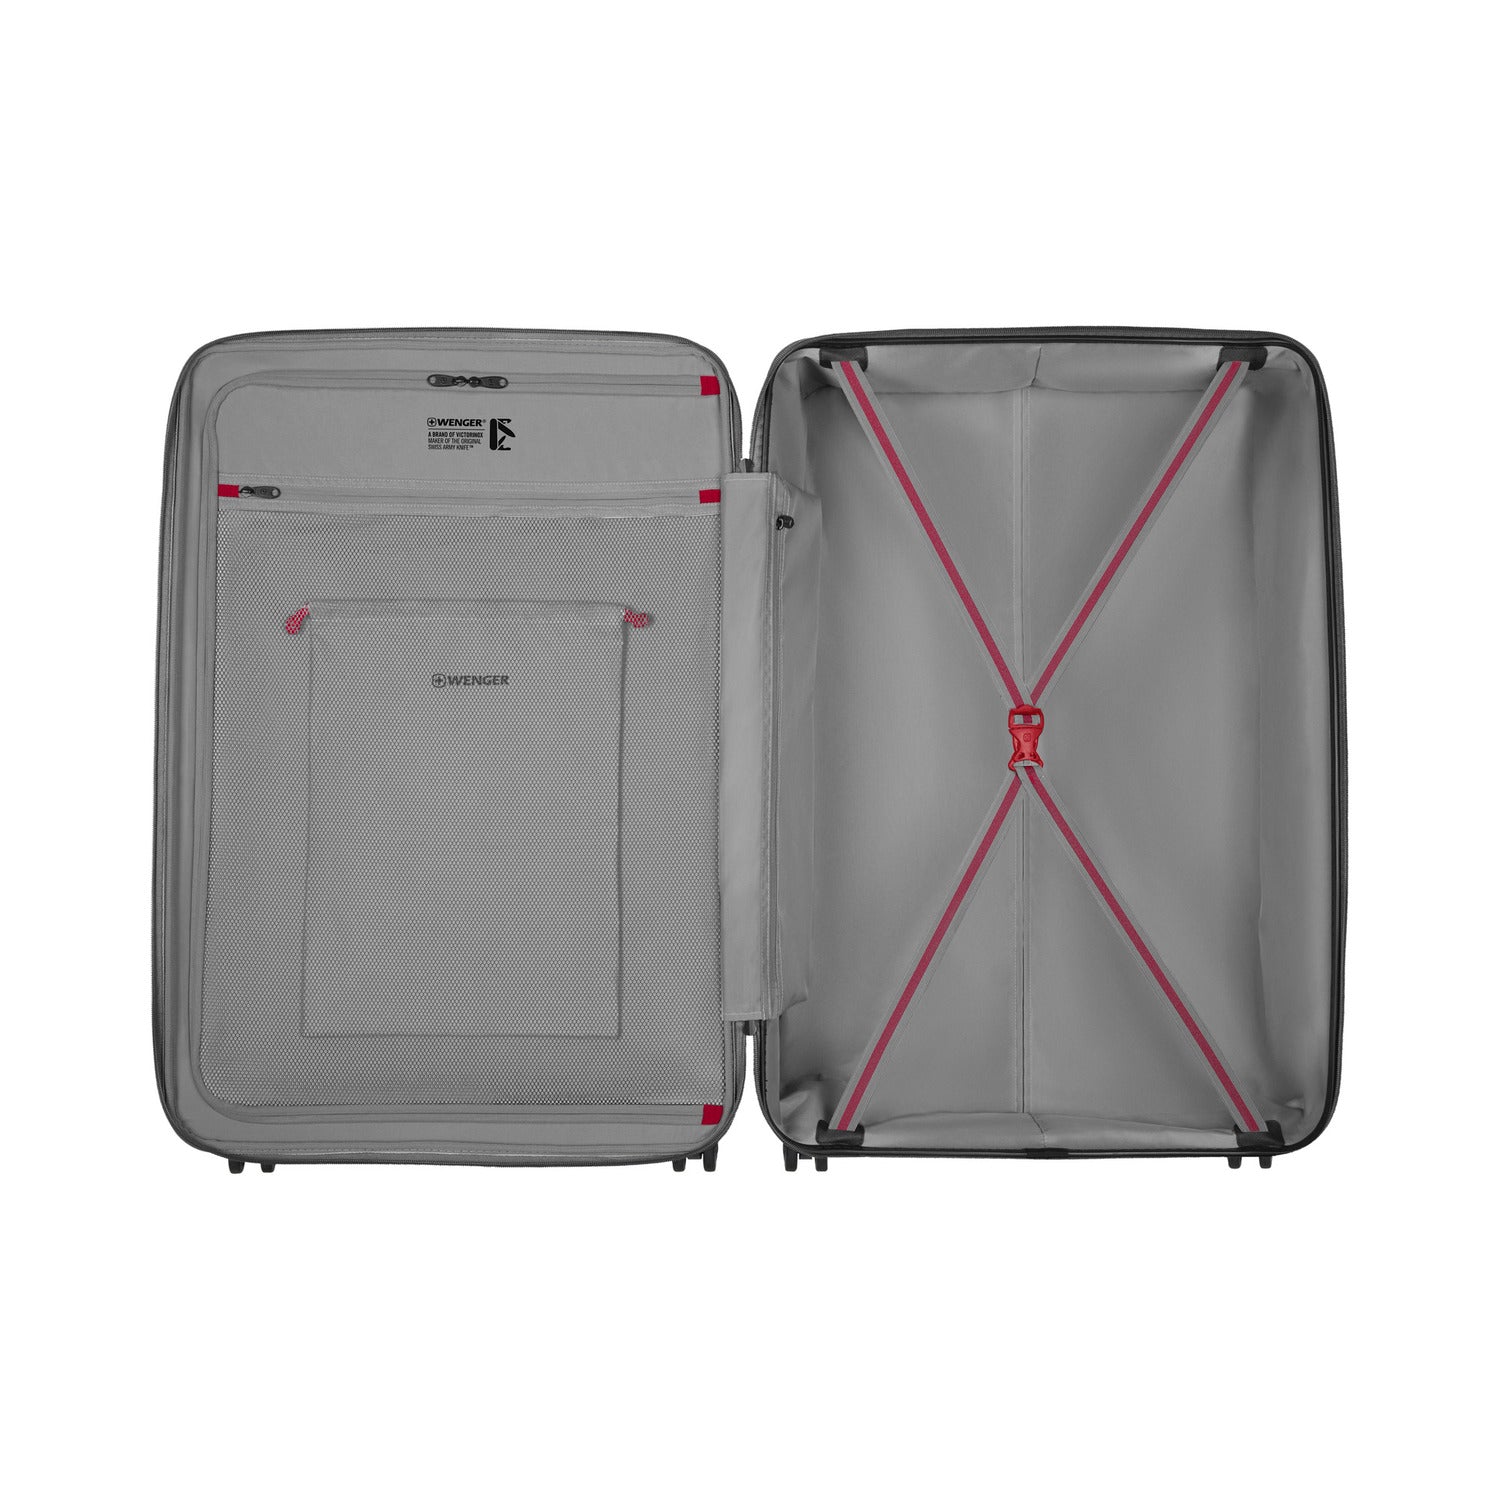 Wenger Motion 81cm Hardside Expandable Check-In Luggage Trolley Grey - 612707